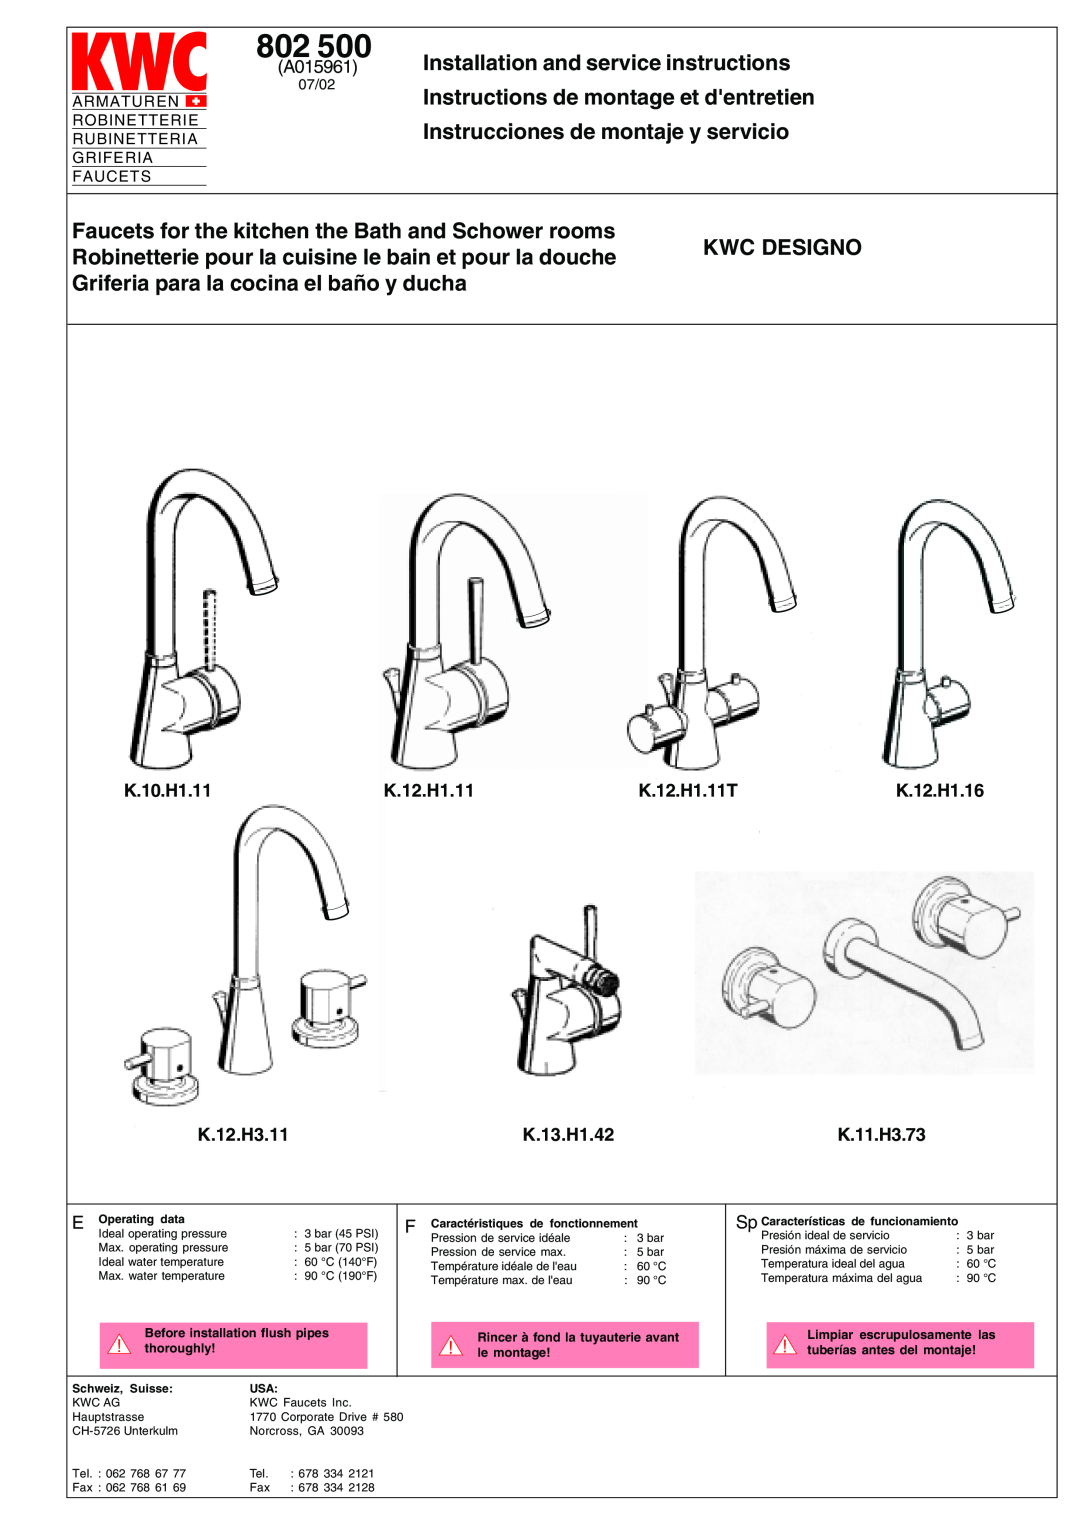 KWC K.12.H1.11T manual Installation and service instructions, Instructions de montage et dentretien, E Operating data 